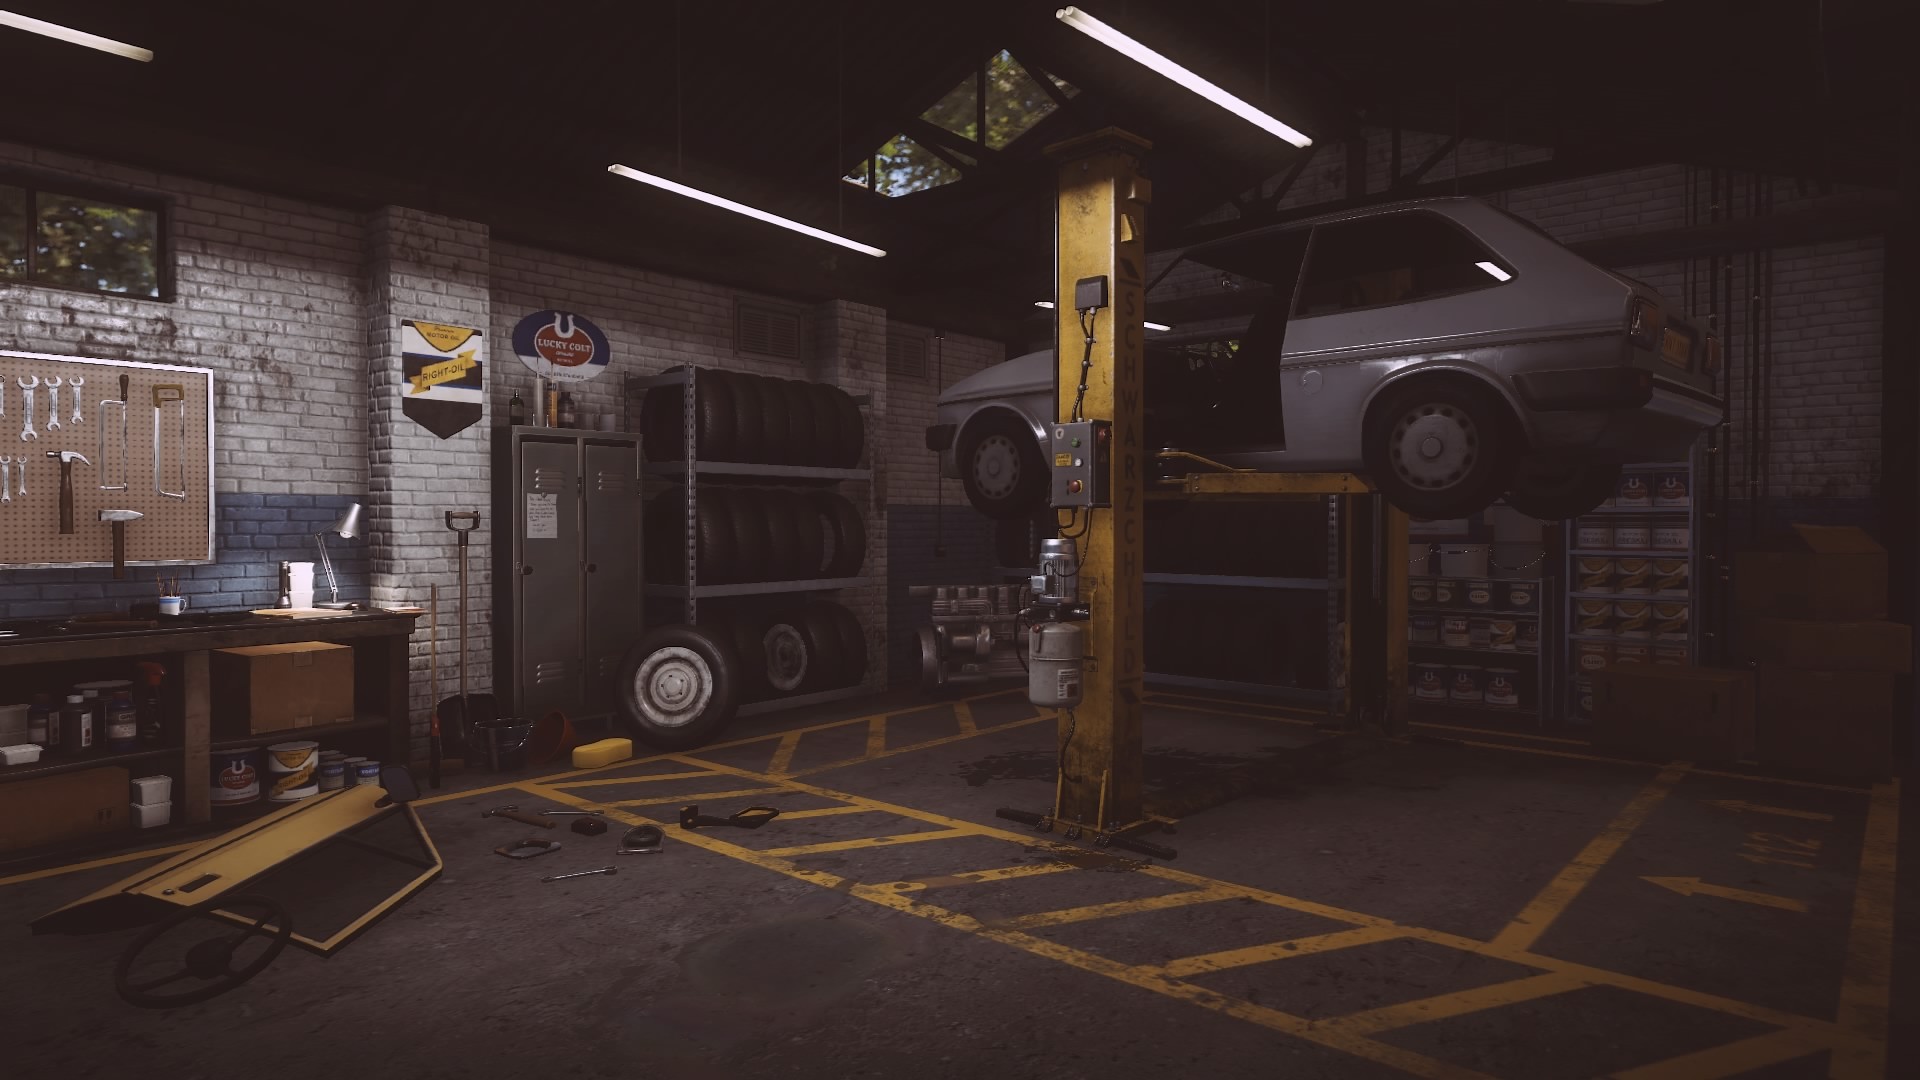 Everybodys Gone To The Rapture In Game CryEngine Garage Workshop 1920x1080